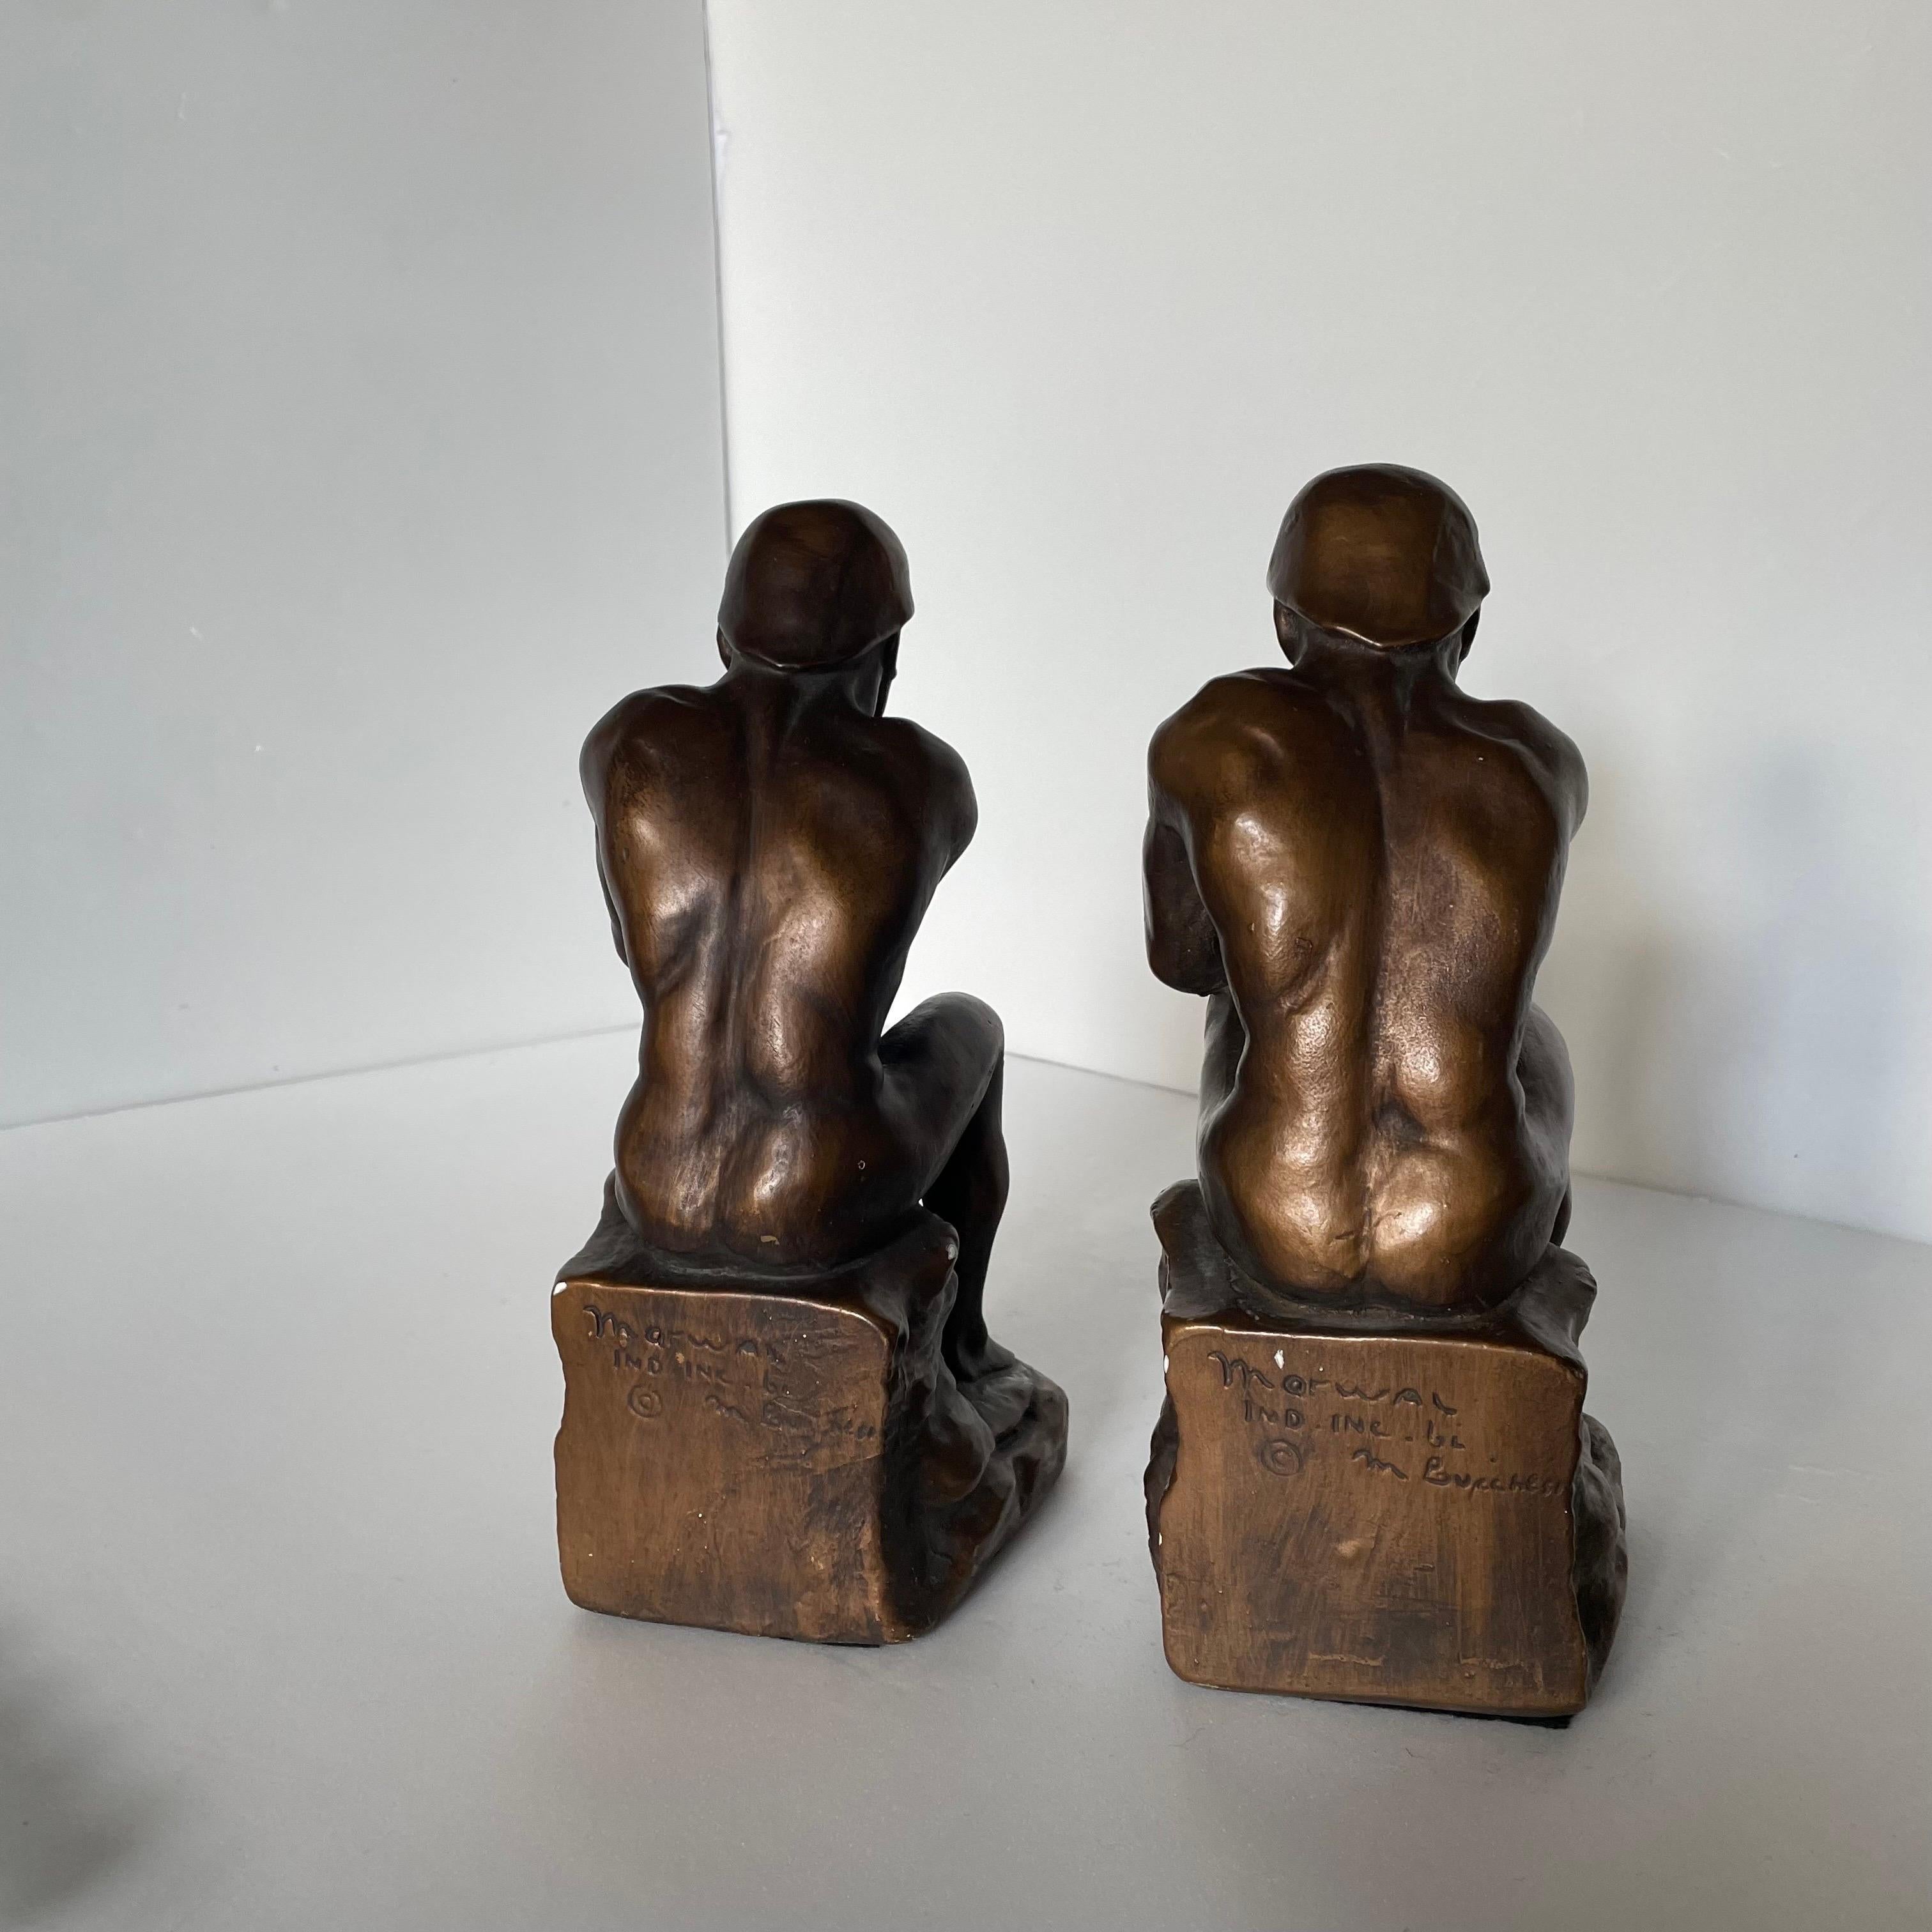 Pair of Antique Male Nude Figural Bookends - the Thinker, 1960s In Good Condition For Sale In Cordova, SC